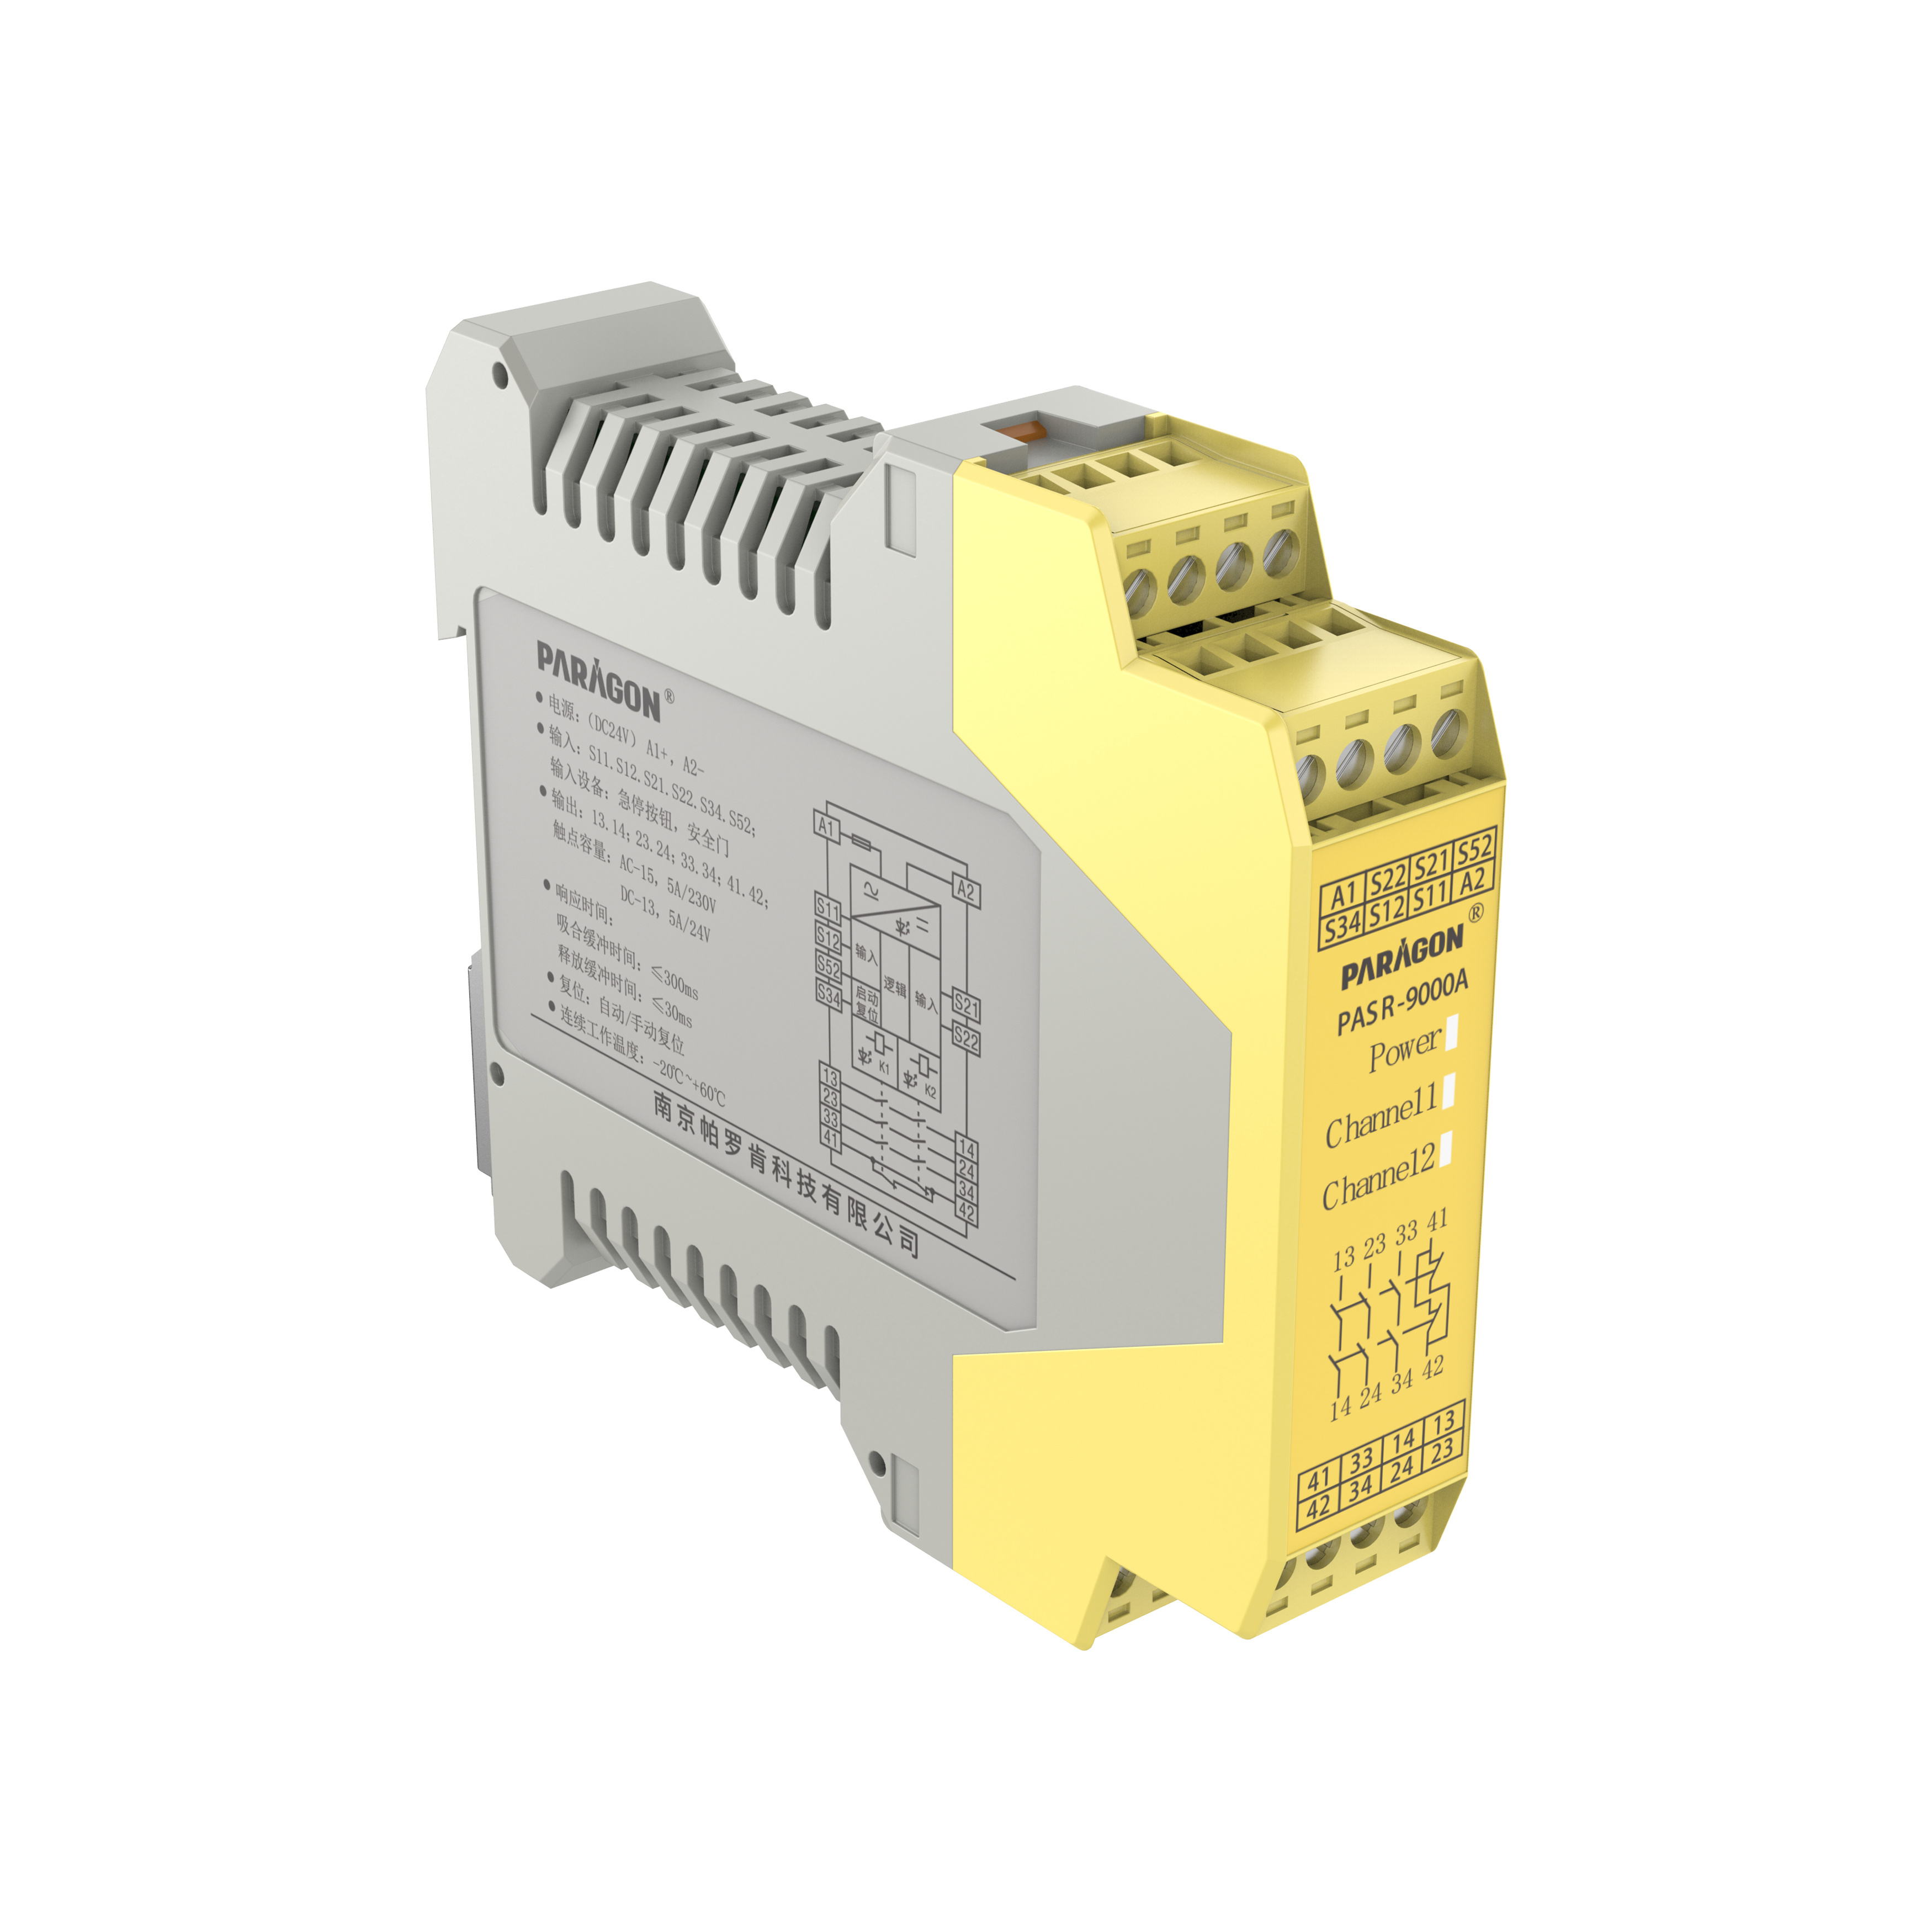 PASR-9000A Suitable for monitoring emergency stop switch and safety door